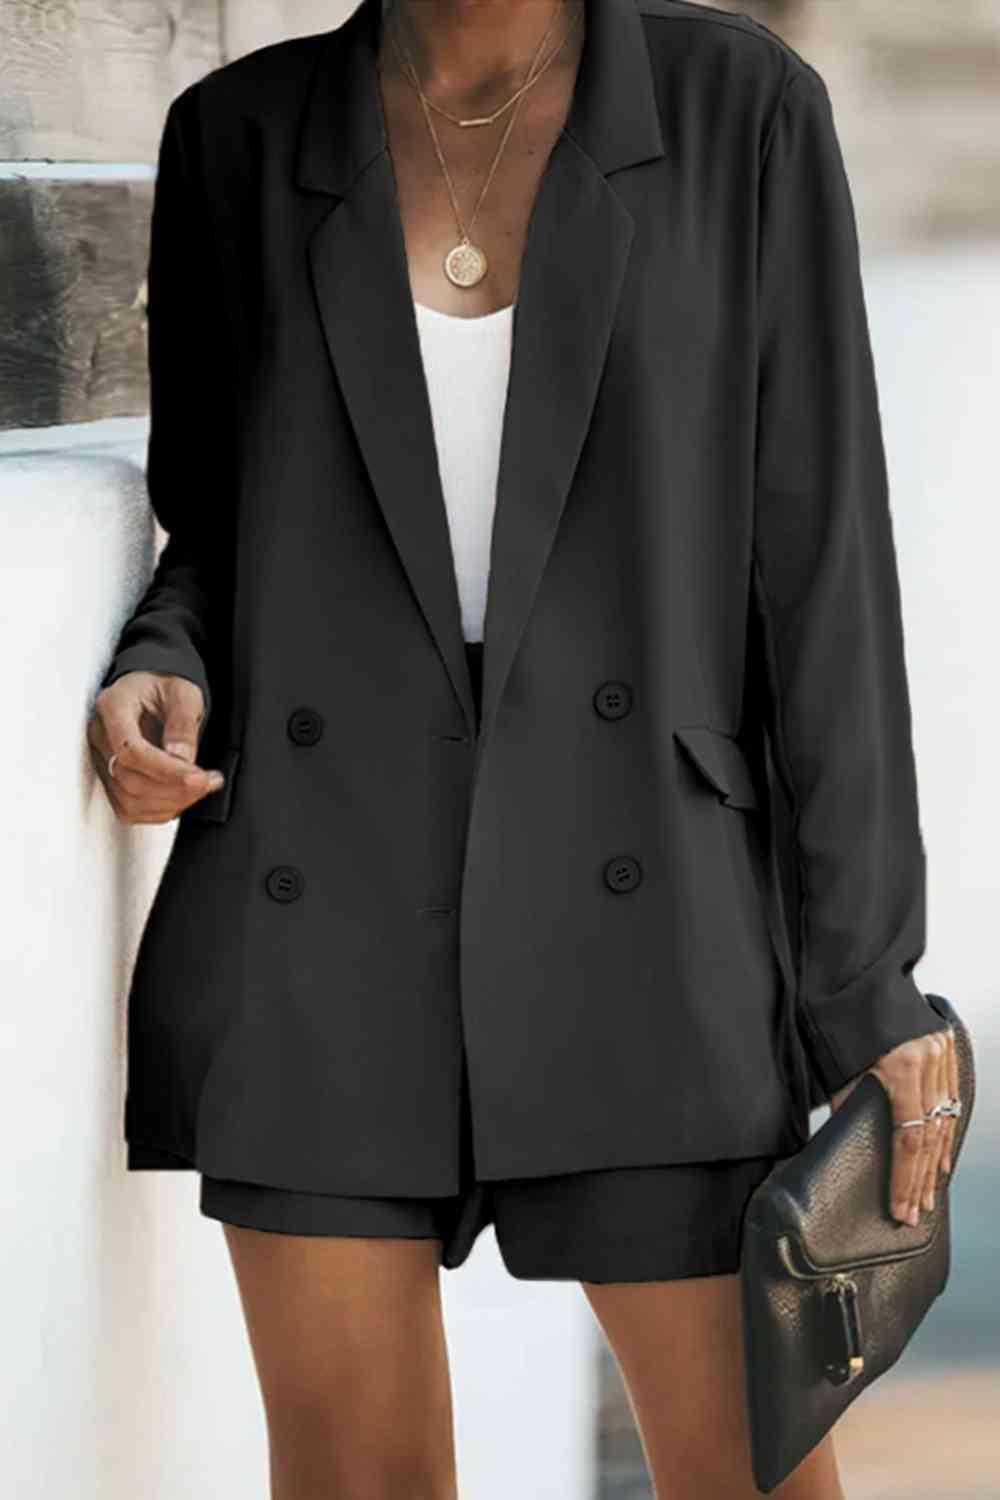 a woman wearing a black blazer and shorts